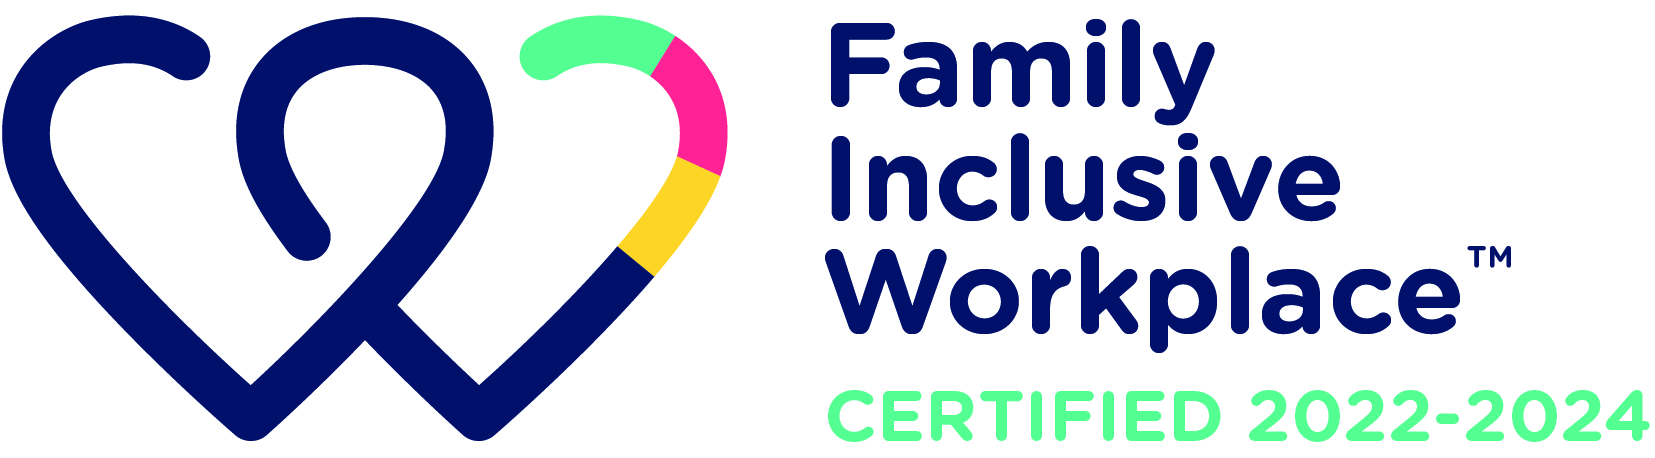 Family Inclusive Workplace Certification Badge